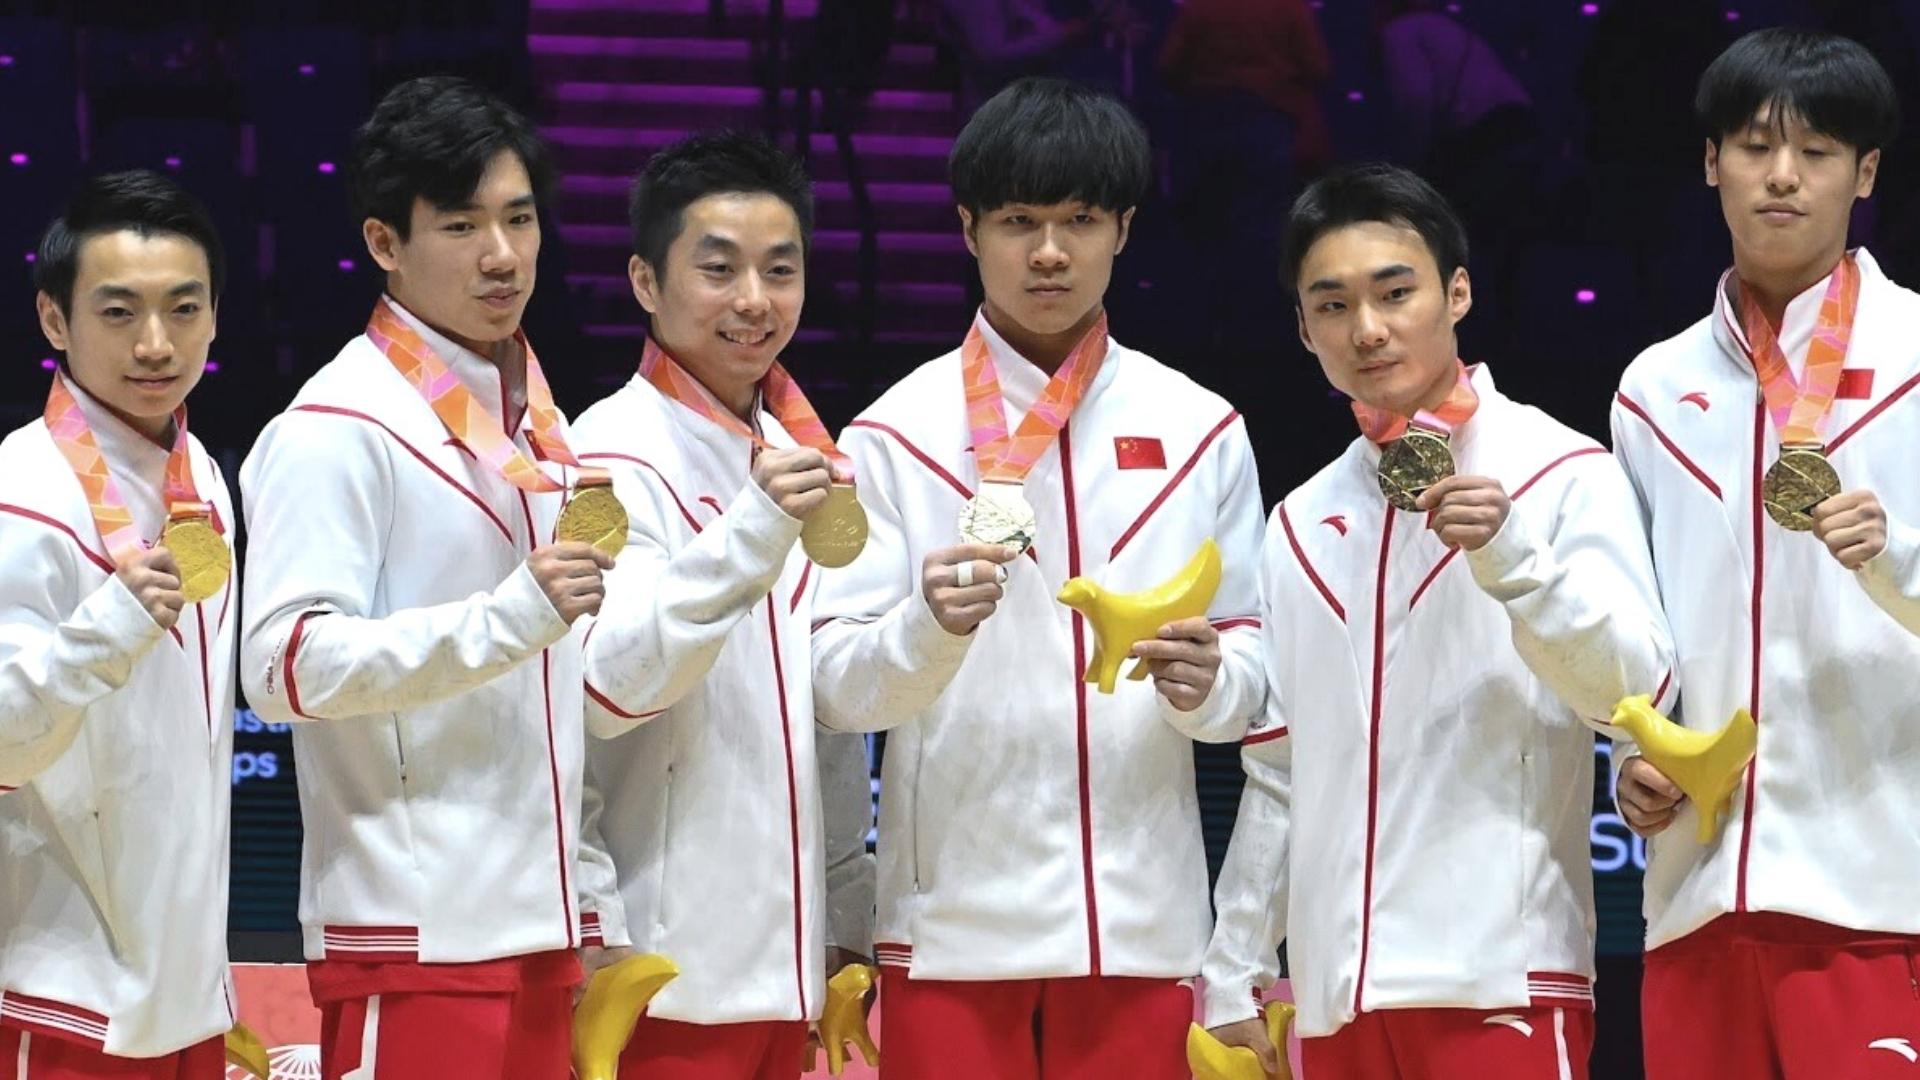 The Chinese men's team won gold on Wednesday night at the 2022 World Gymnastics Championships.